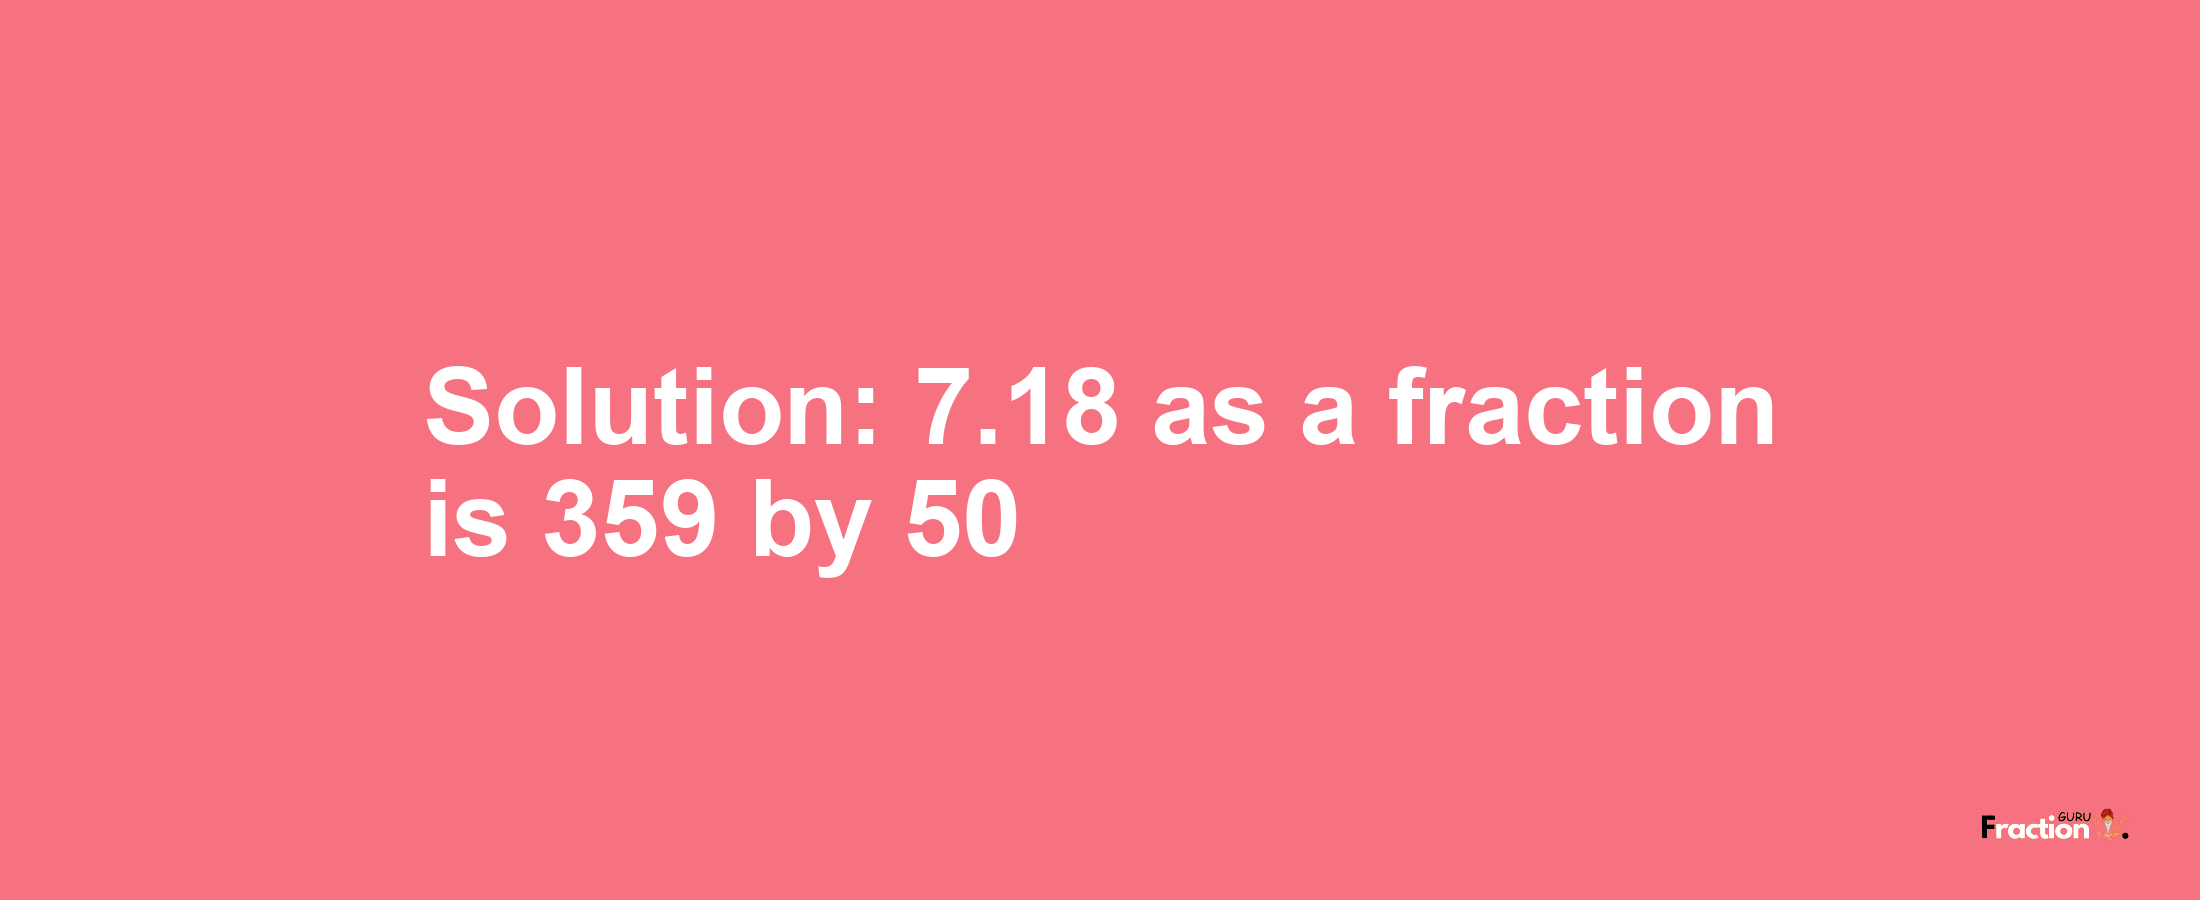 Solution:7.18 as a fraction is 359/50